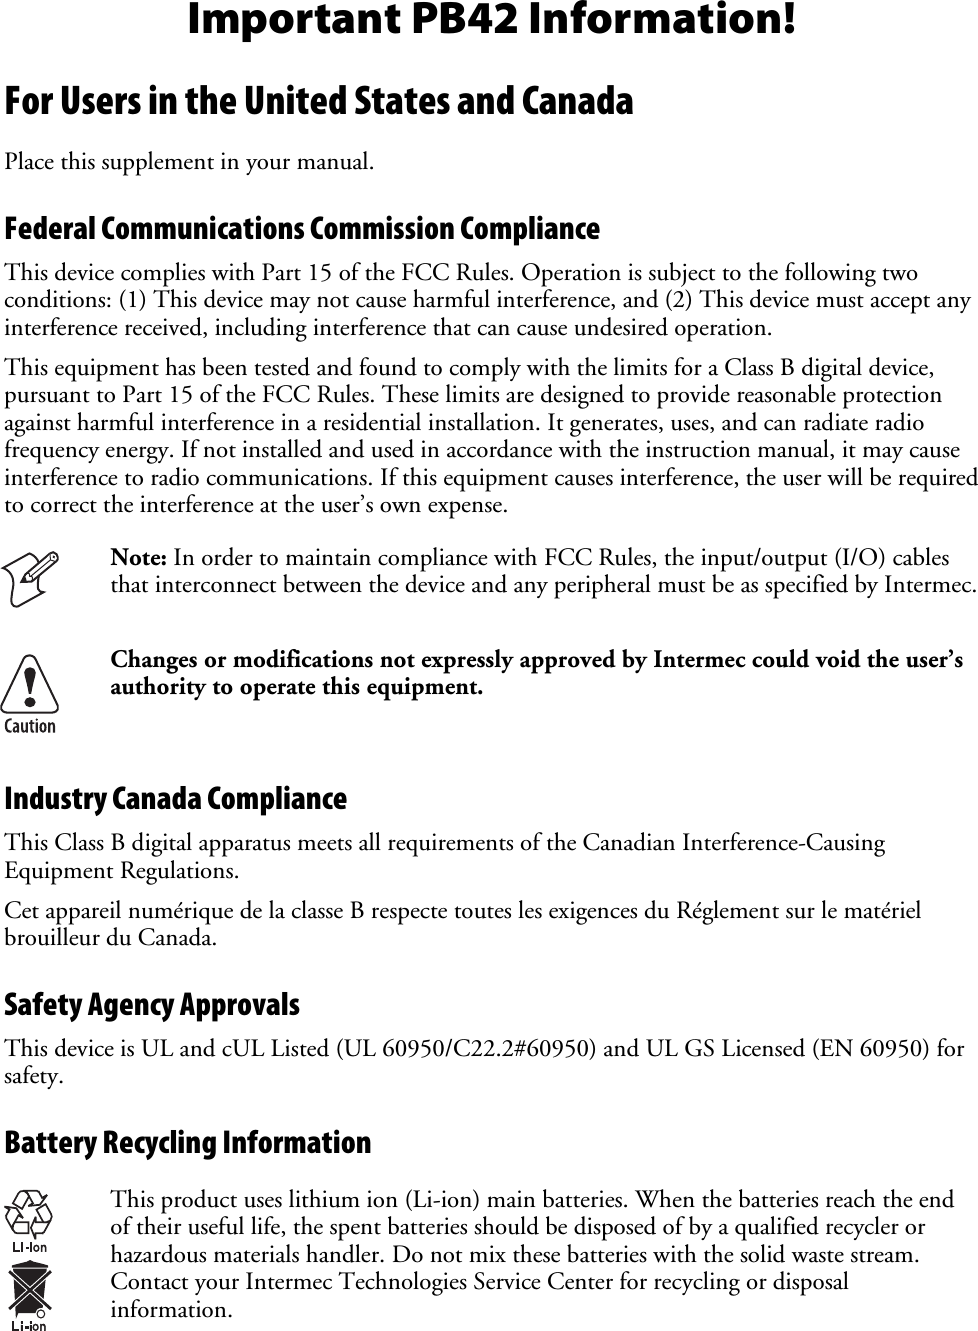 Important PB42 Information! For Users in the United States and Canada Place this supplement in your manual. Federal Communications Commission Compliance  This device complies with Part 15 of the FCC Rules. Operation is subject to the following two conditions: (1) This device may not cause harmful interference, and (2) This device must accept any interference received, including interference that can cause undesired operation. This equipment has been tested and found to comply with the limits for a Class B digital device, pursuant to Part 15 of the FCC Rules. These limits are designed to provide reasonable protection against harmful interference in a residential installation. It generates, uses, and can radiate radio frequency energy. If not installed and used in accordance with the instruction manual, it may cause interference to radio communications. If this equipment causes interference, the user will be required to correct the interference at the user’s own expense.  Note: In order to maintain compliance with FCC Rules, the input/output (I/O) cables that interconnect between the device and any peripheral must be as specified by Intermec.  Changes or modifications not expressly approved by Intermec could void the user’s authority to operate this equipment. Industry Canada Compliance This Class B digital apparatus meets all requirements of the Canadian Interference-Causing Equipment Regulations. Cet appareil numérique de la classe B respecte toutes les exigences du Réglement sur le matériel brouilleur du Canada. Safety Agency Approvals This device is UL and cUL Listed (UL 60950/C22.2#60950) and UL GS Licensed (EN 60950) for safety. Battery Recycling Information  This product uses lithium ion (Li-ion) main batteries. When the batteries reach the end of their useful life, the spent batteries should be disposed of by a qualified recycler or hazardous materials handler. Do not mix these batteries with the solid waste stream. Contact your Intermec Technologies Service Center for recycling or disposal information. 